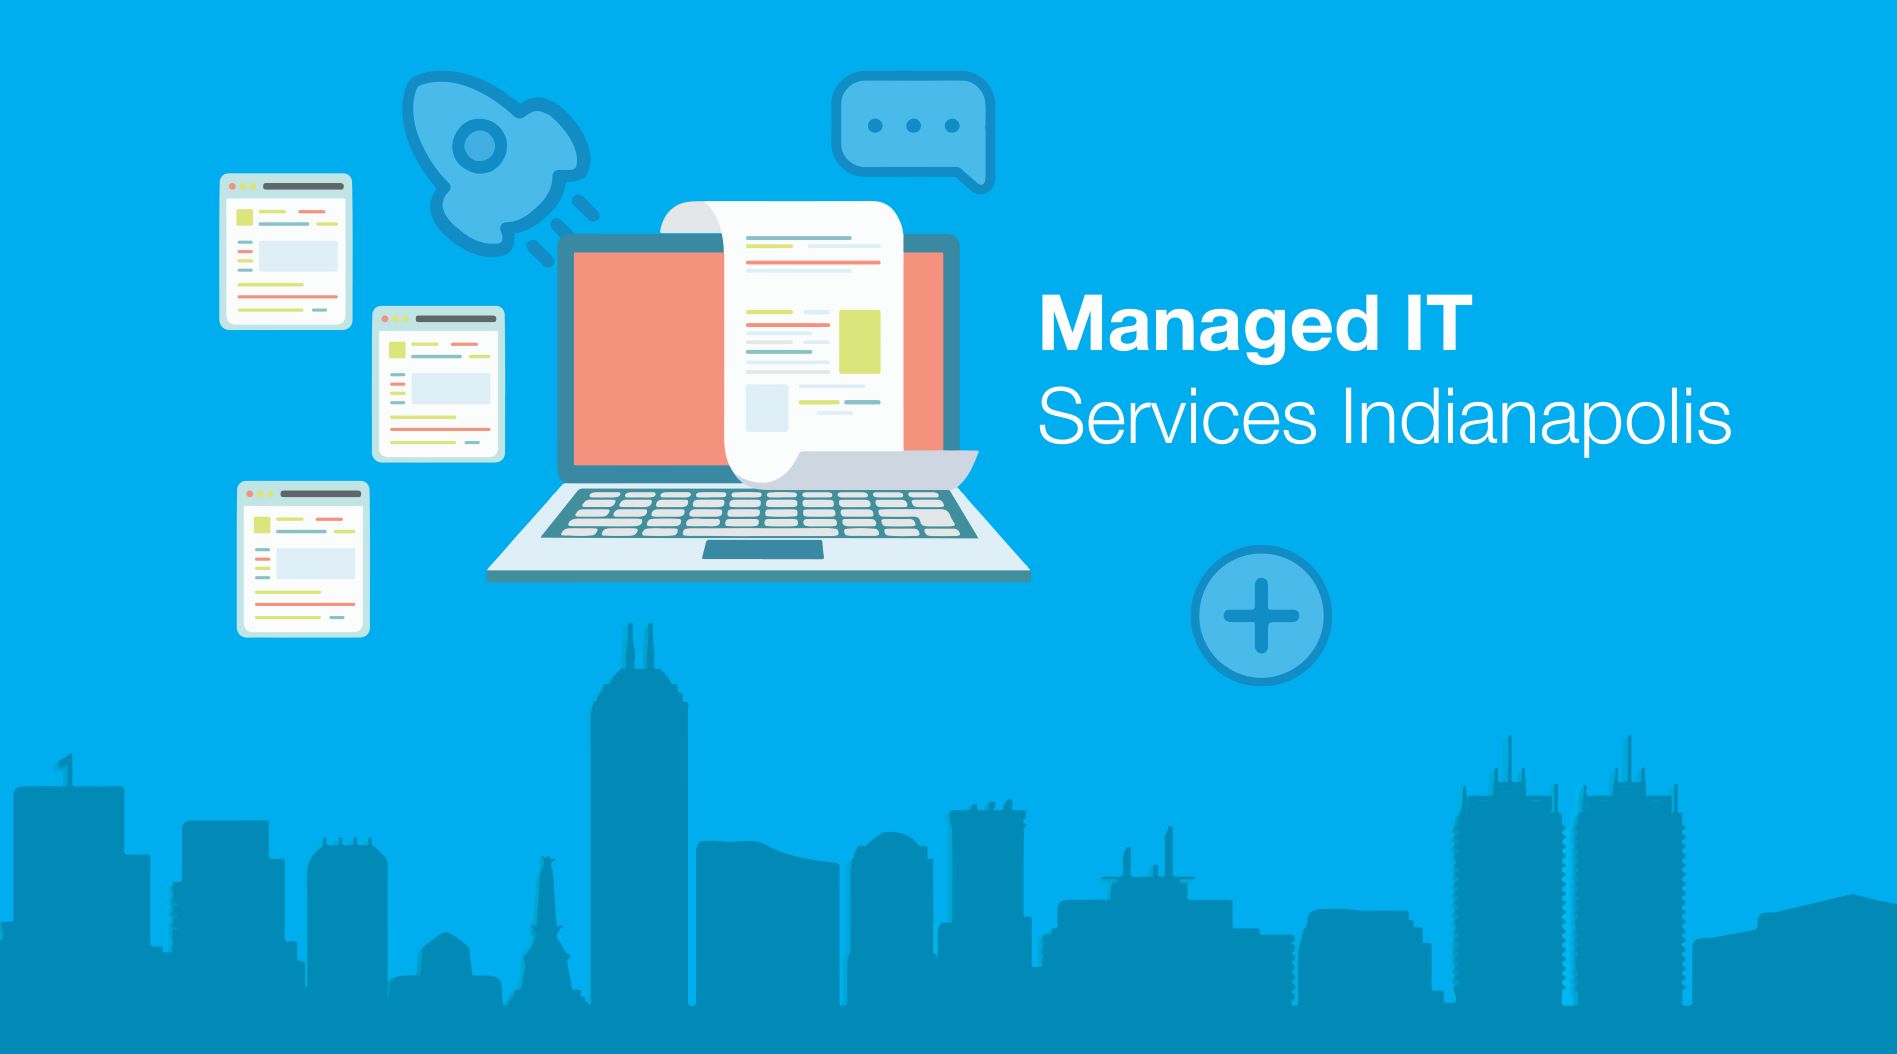 Managed IT Services Indianapolis